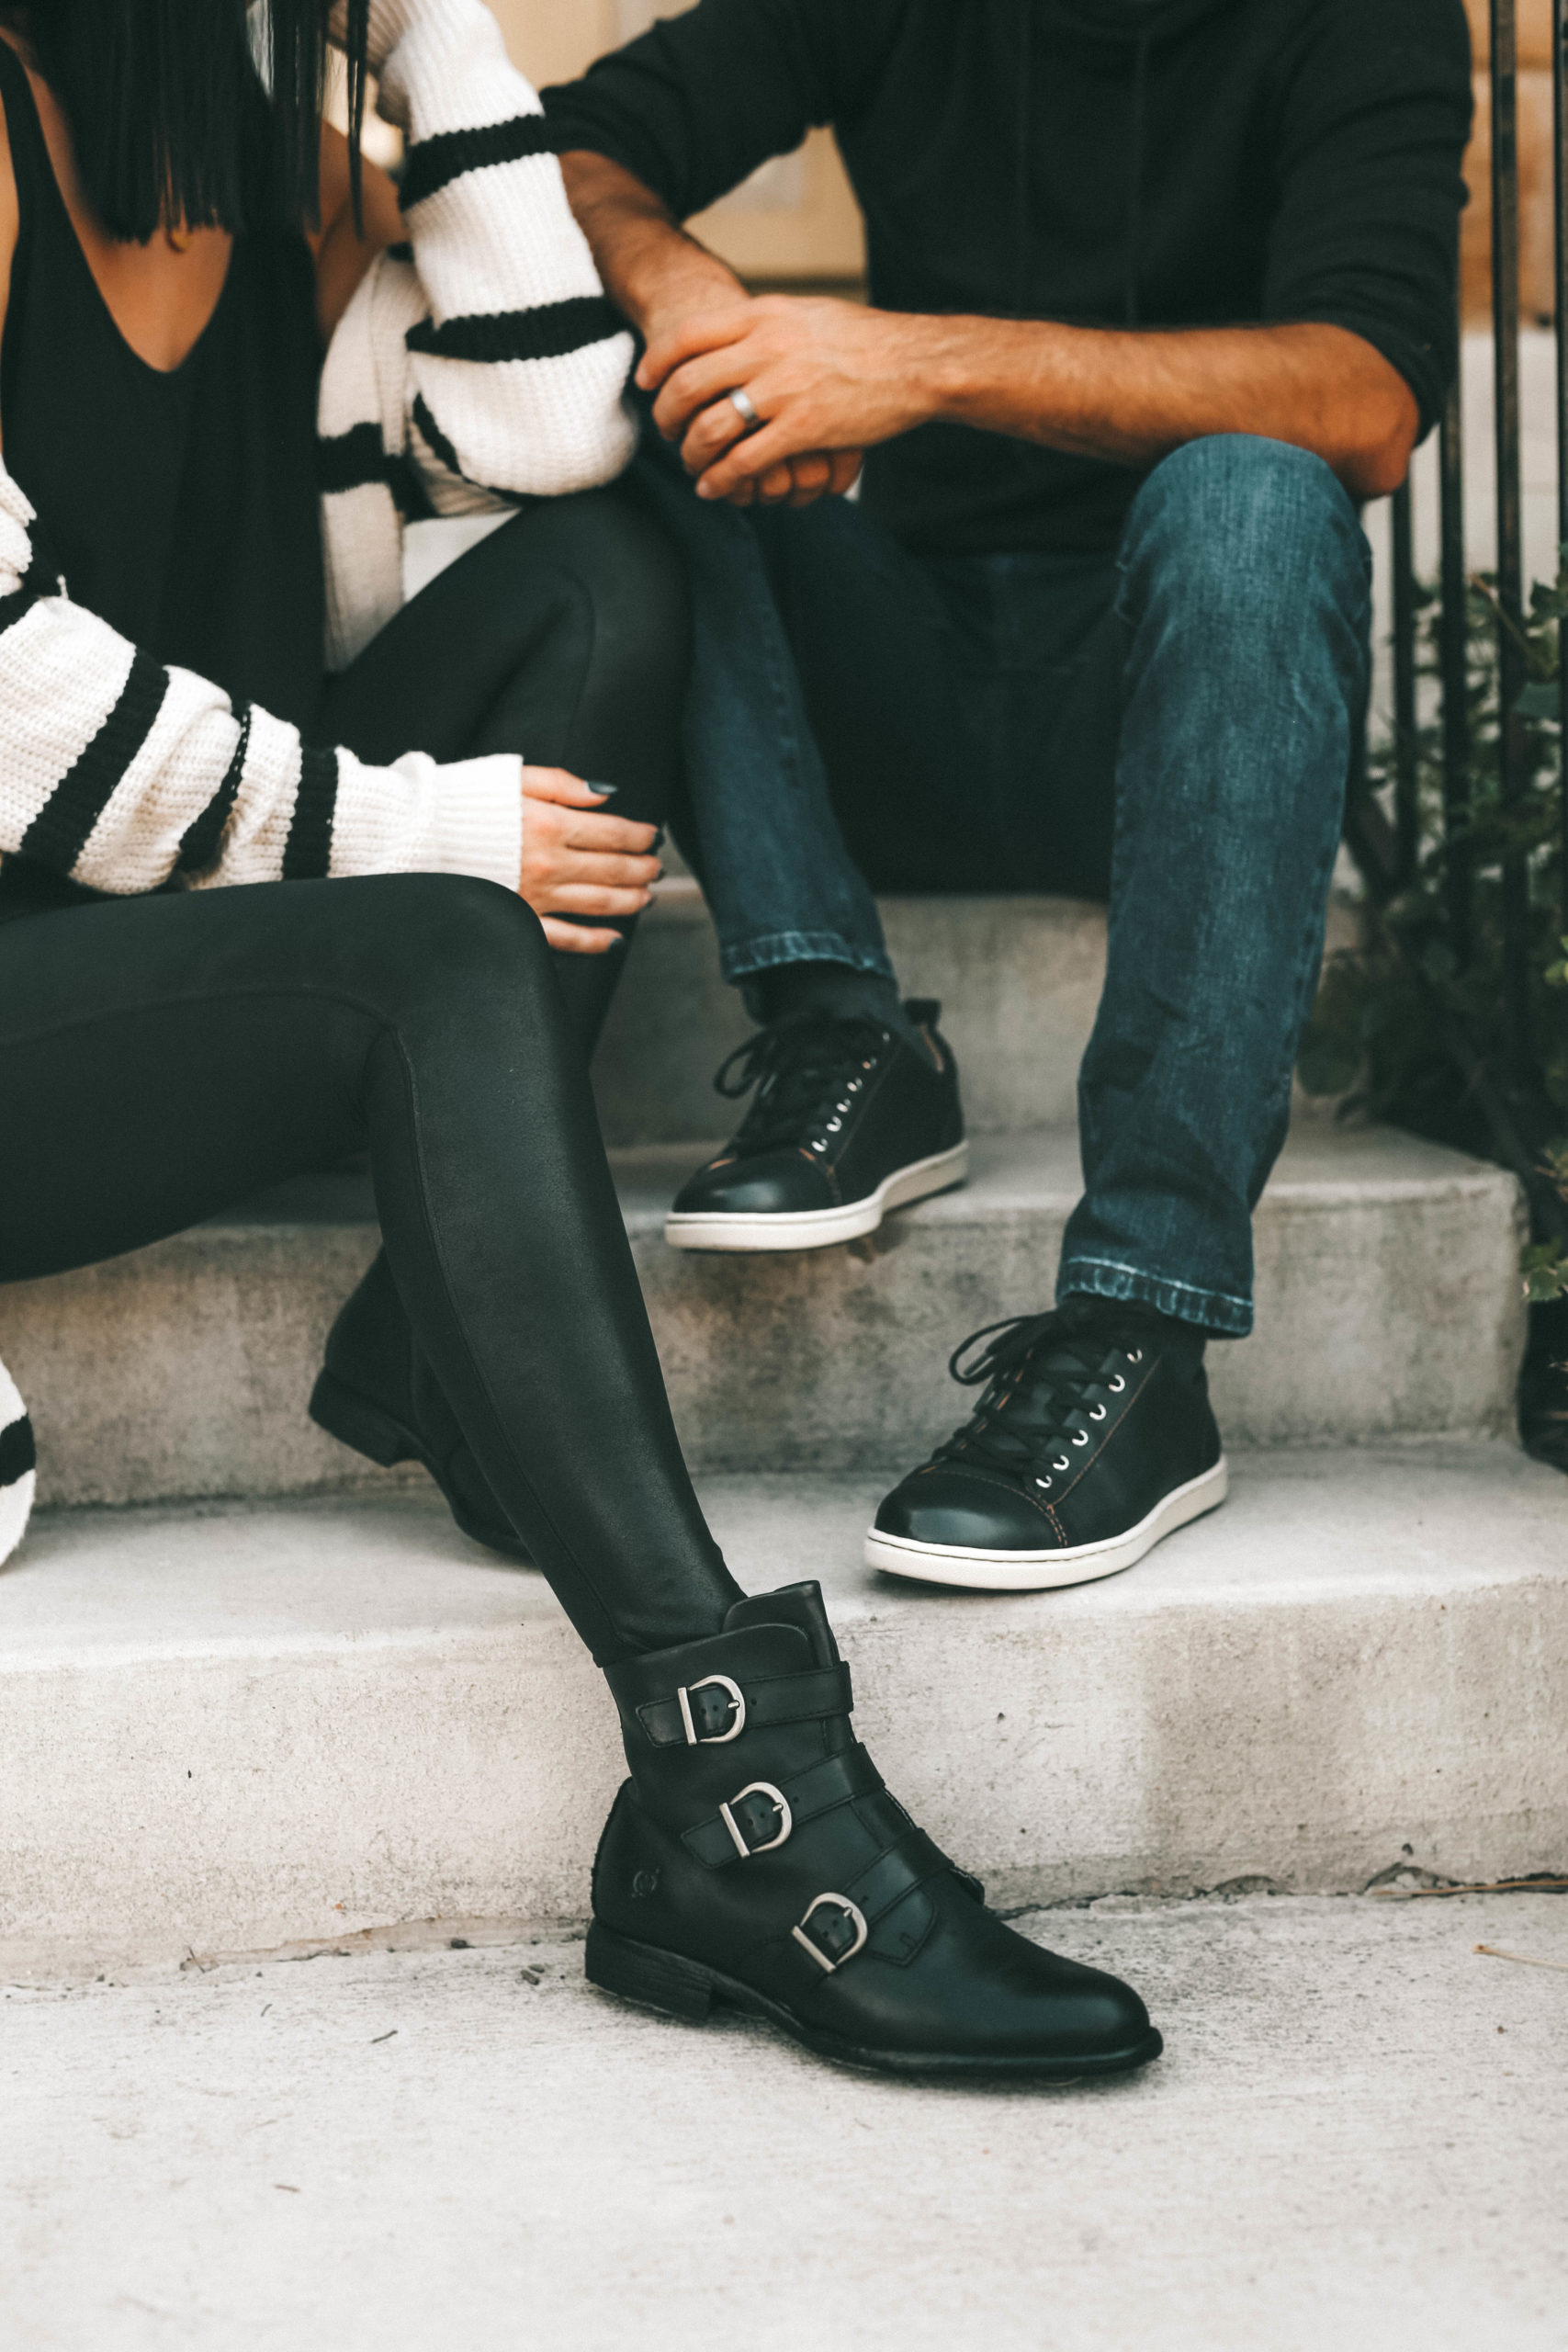 Must Have Cute Fall Shoes for Him & Her by popular Austin fashion blog, Dressed to Kill: image of a man and woman wearing Zappos Born Nivine ankle boots and Zappos Born Allegheny sneakers.